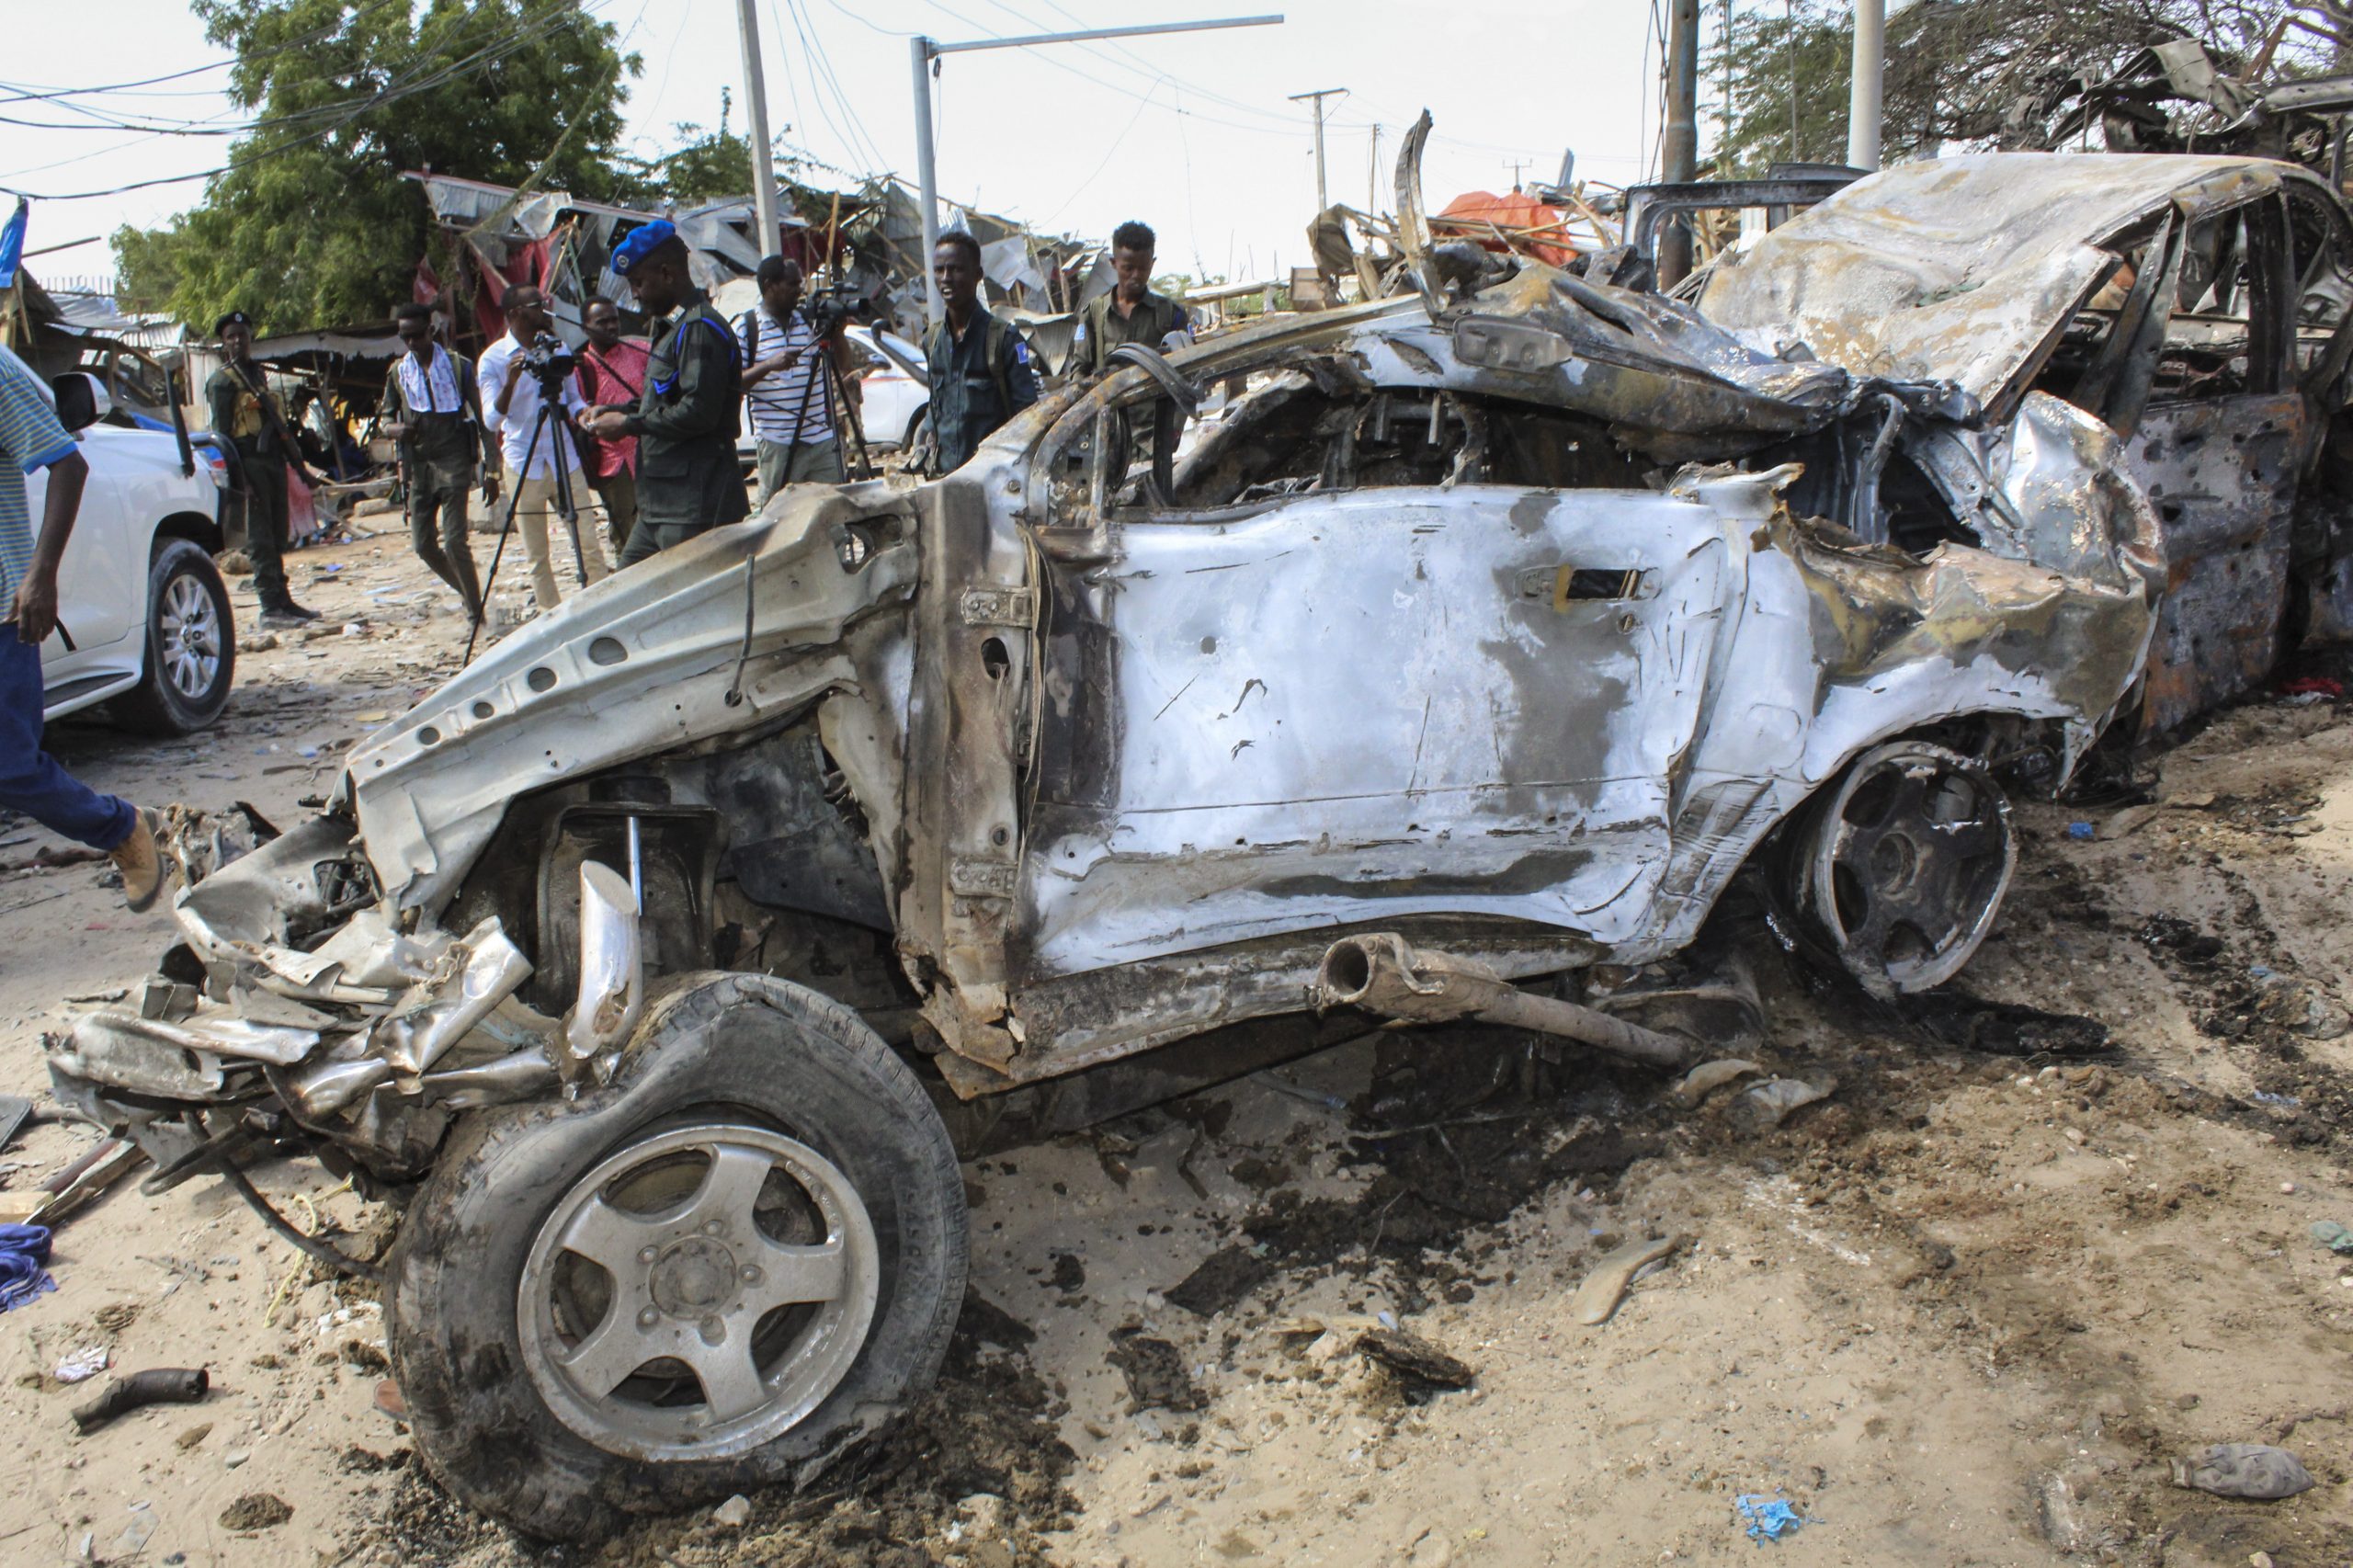 epa08092359 A view of the wreckage of a vehicle at the scene of a large explosion near a check point in Mogadishu, Somalia, 28 December 2019. A source at a hospital said that at least 25 people have been killed in what is believed to have been a car bombing. The explosion rocked an area near the junction called Ex-Control Afgoye, in a southwestern suburb of the capital Mogadishu.  EPA/SAID YUSUF WARSAME